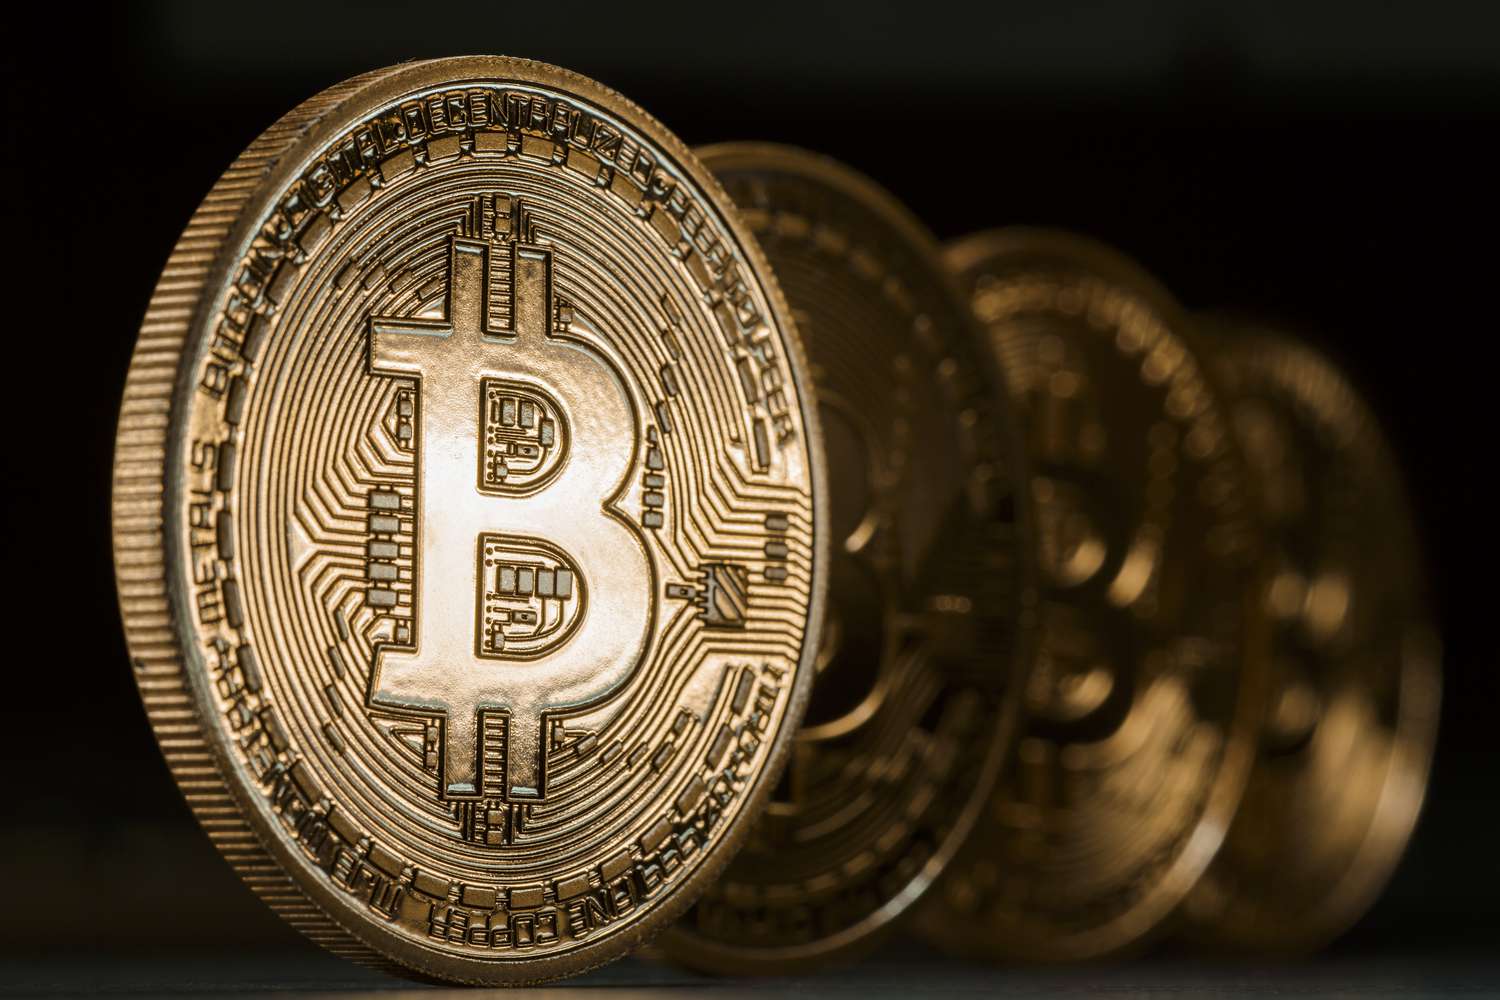 Bitwise CIO sees Bitcoin volatility halving as institutional investments surge